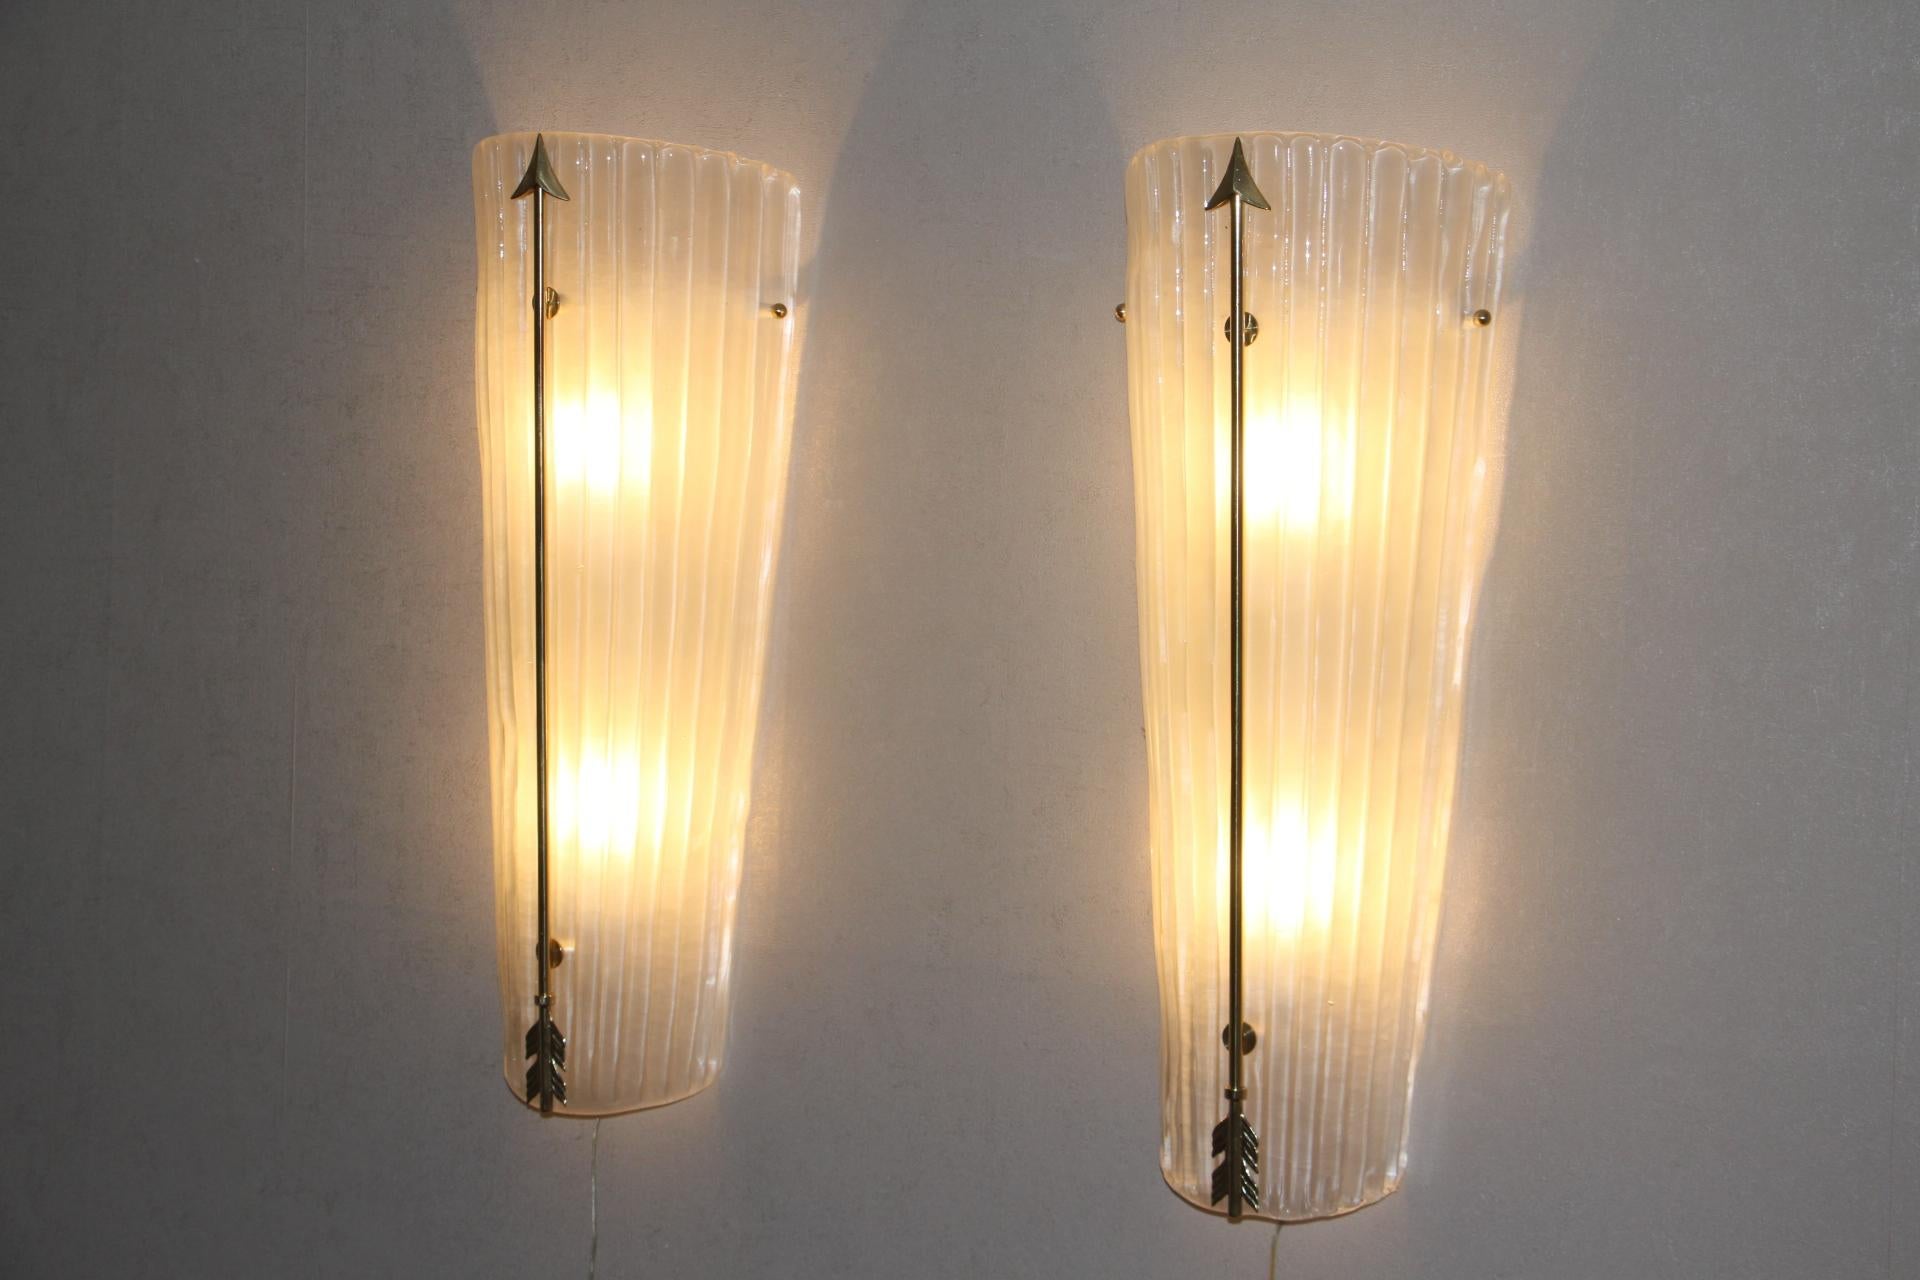 Late 20th Century Tall Mid-Century Pair of Sconces in White Glass , Petitot Style Wall Lights